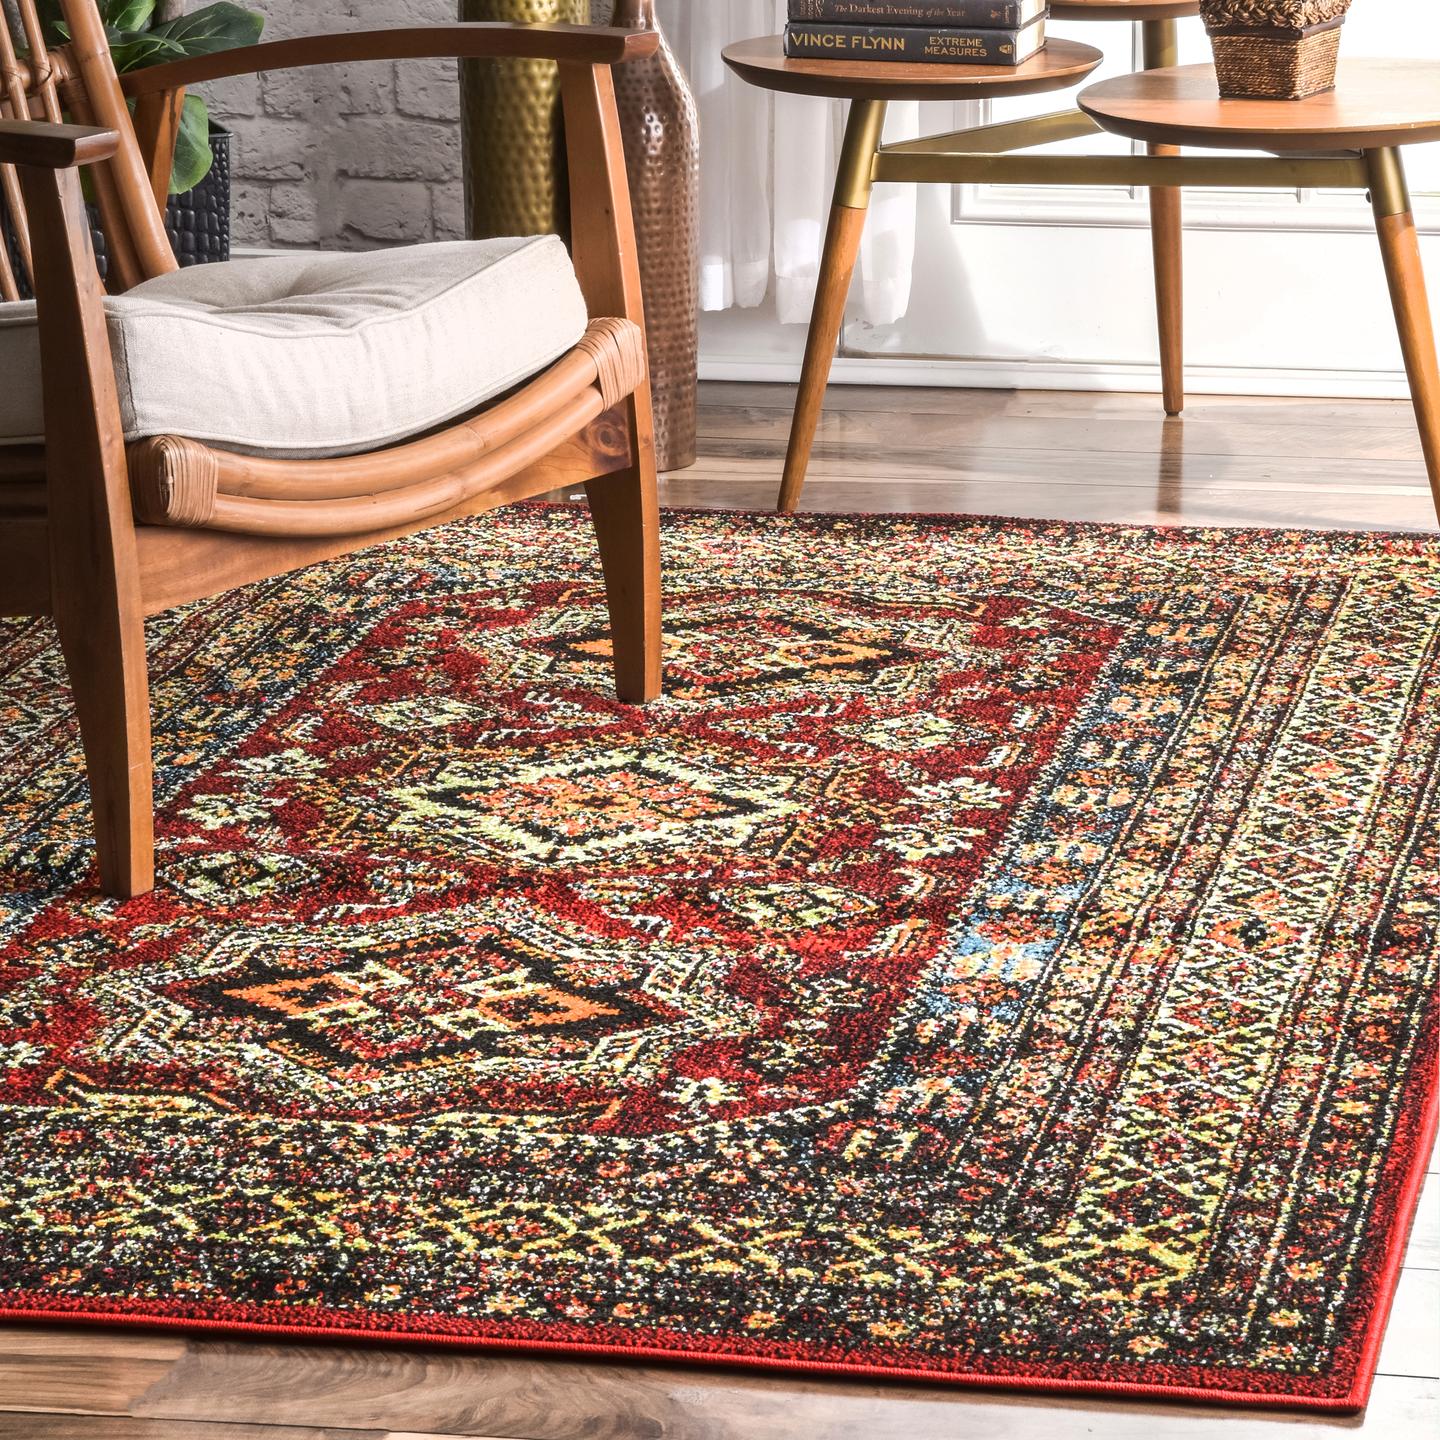 Indoor/Outdoor Transitional Medieval Randy Area Rug - image 1 of 2